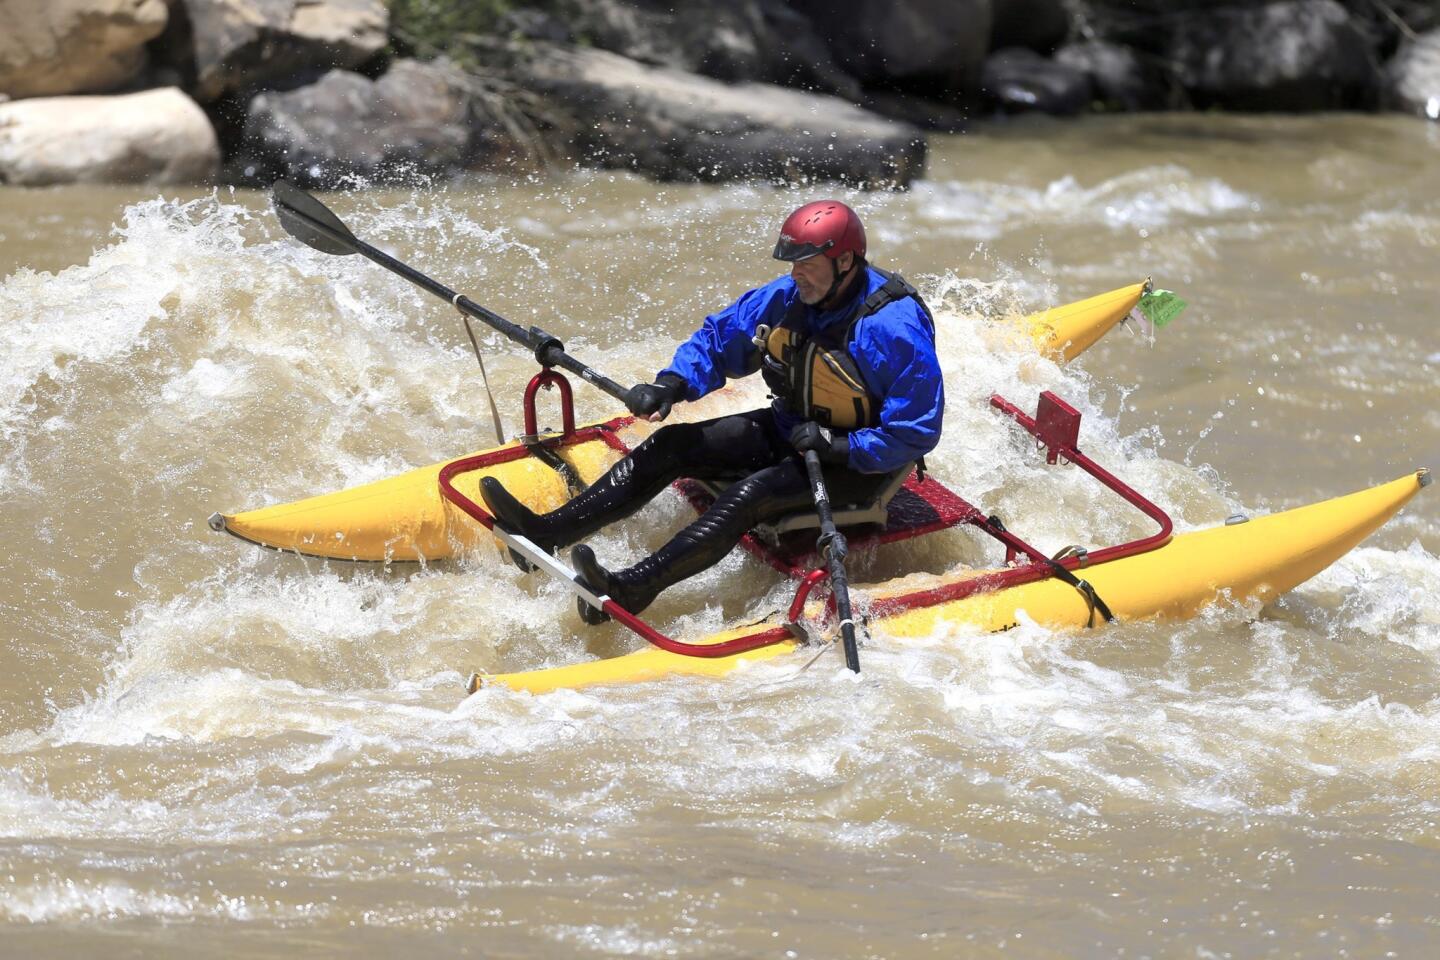 Water sports on the Animas River